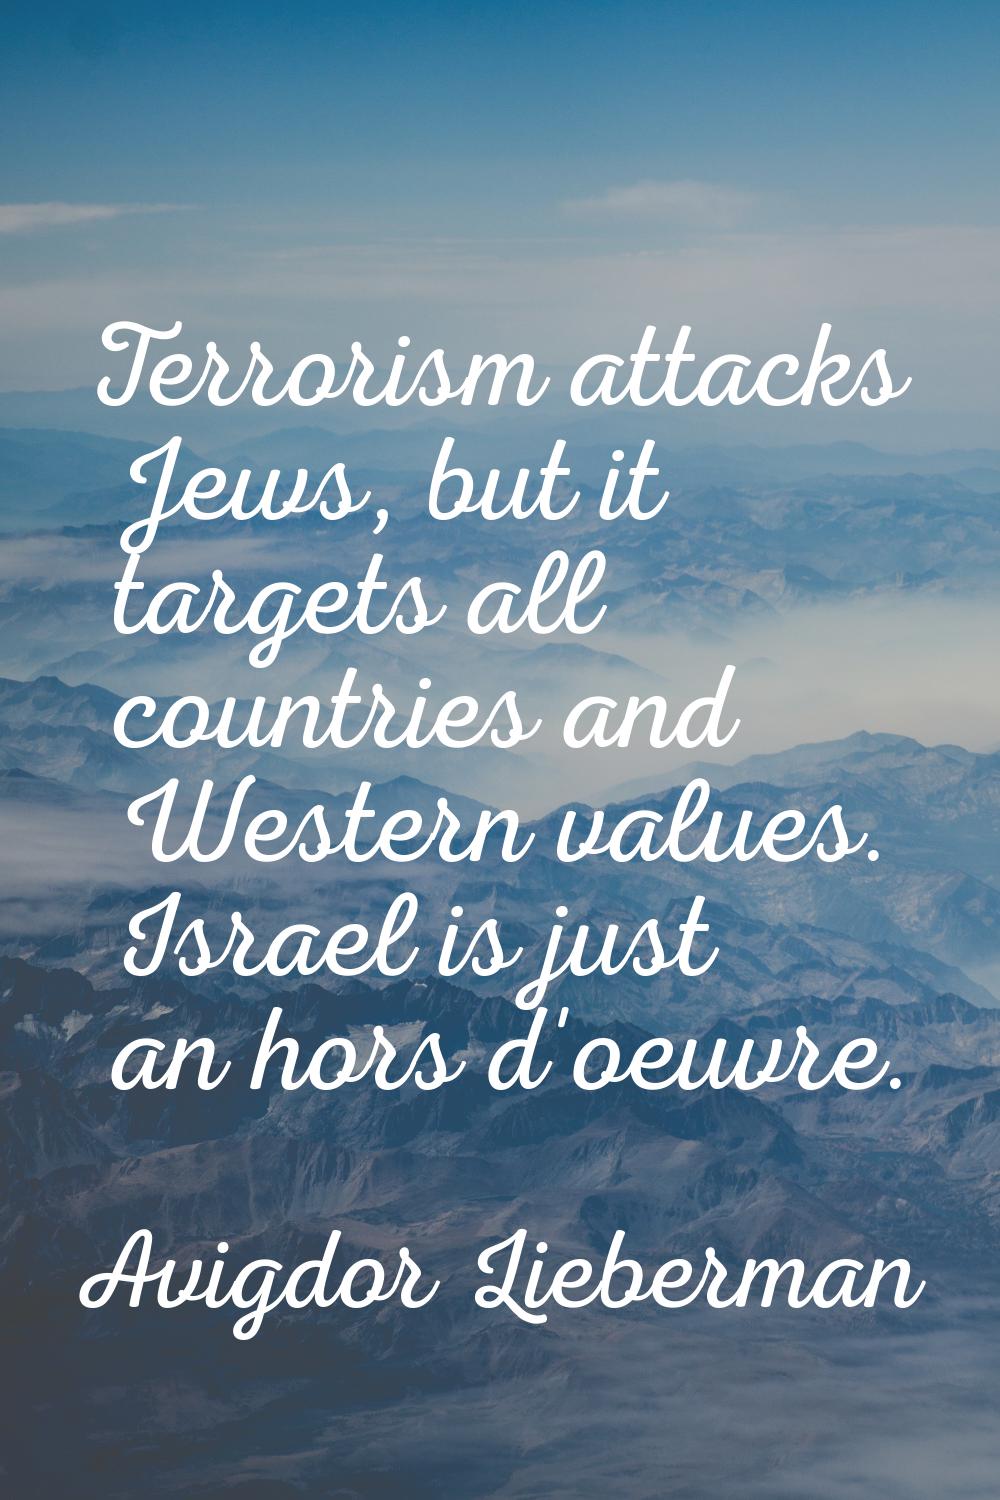 Terrorism attacks Jews, but it targets all countries and Western values. Israel is just an hors d'o